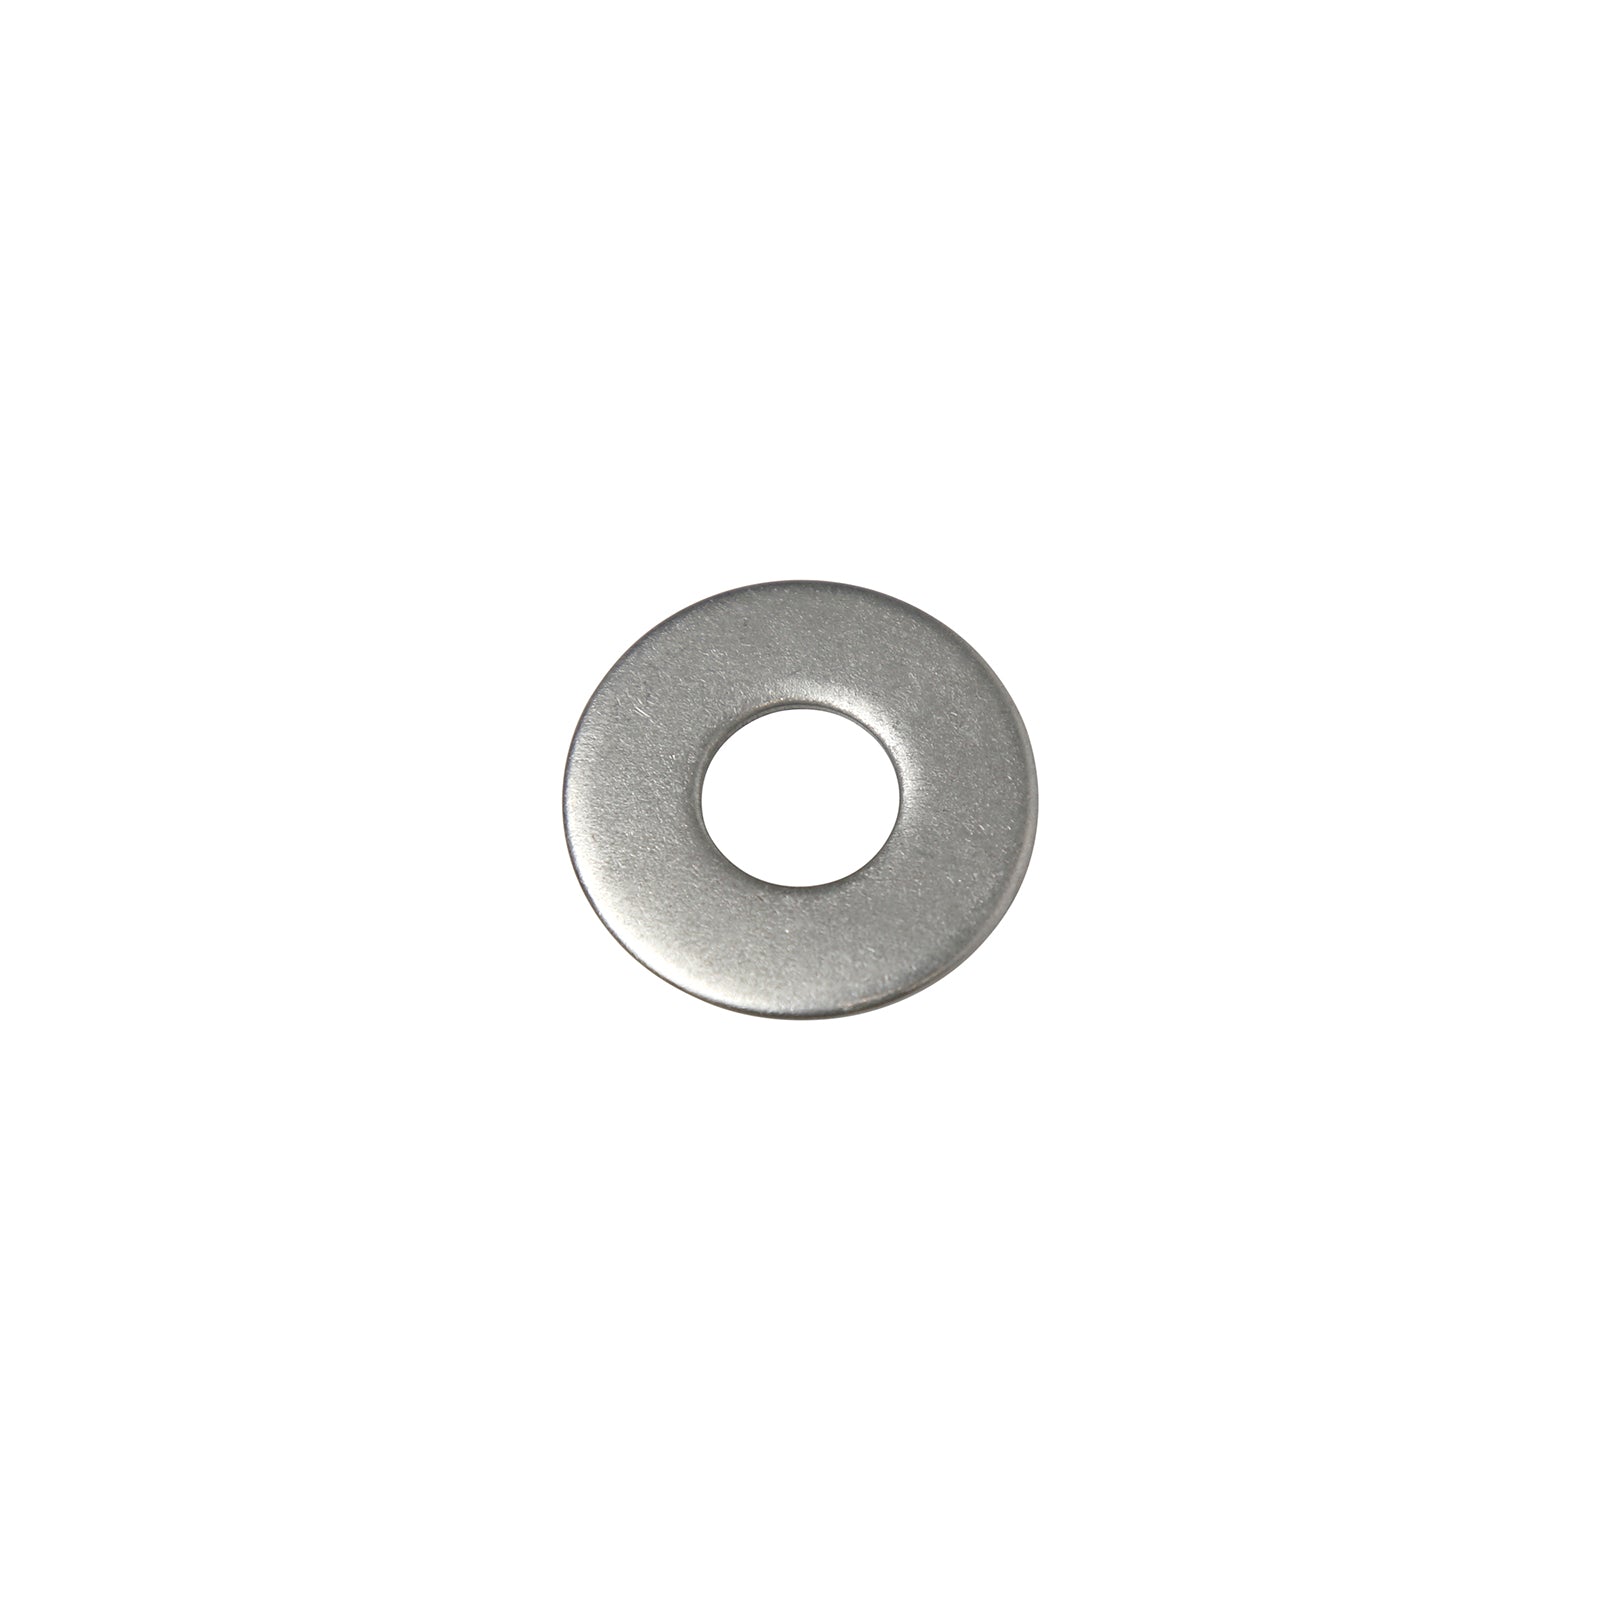 1/2" Conquest USS Flat Washer - 304 Stainless Steel